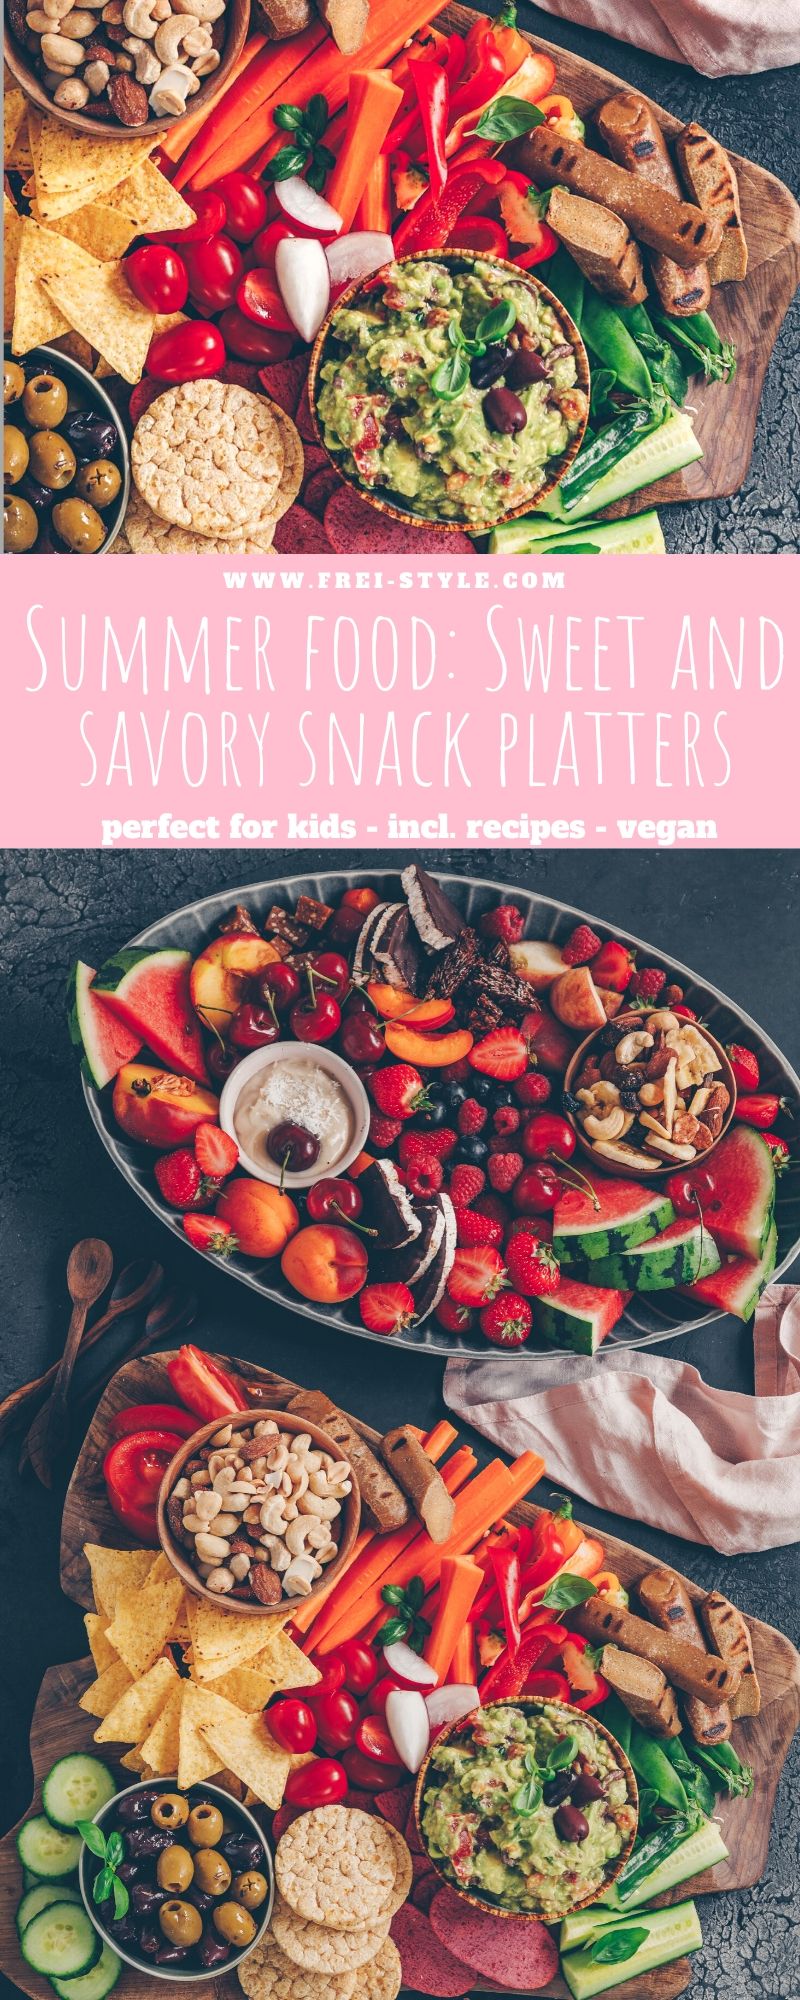 Summer food: Sweet and savory snack platters